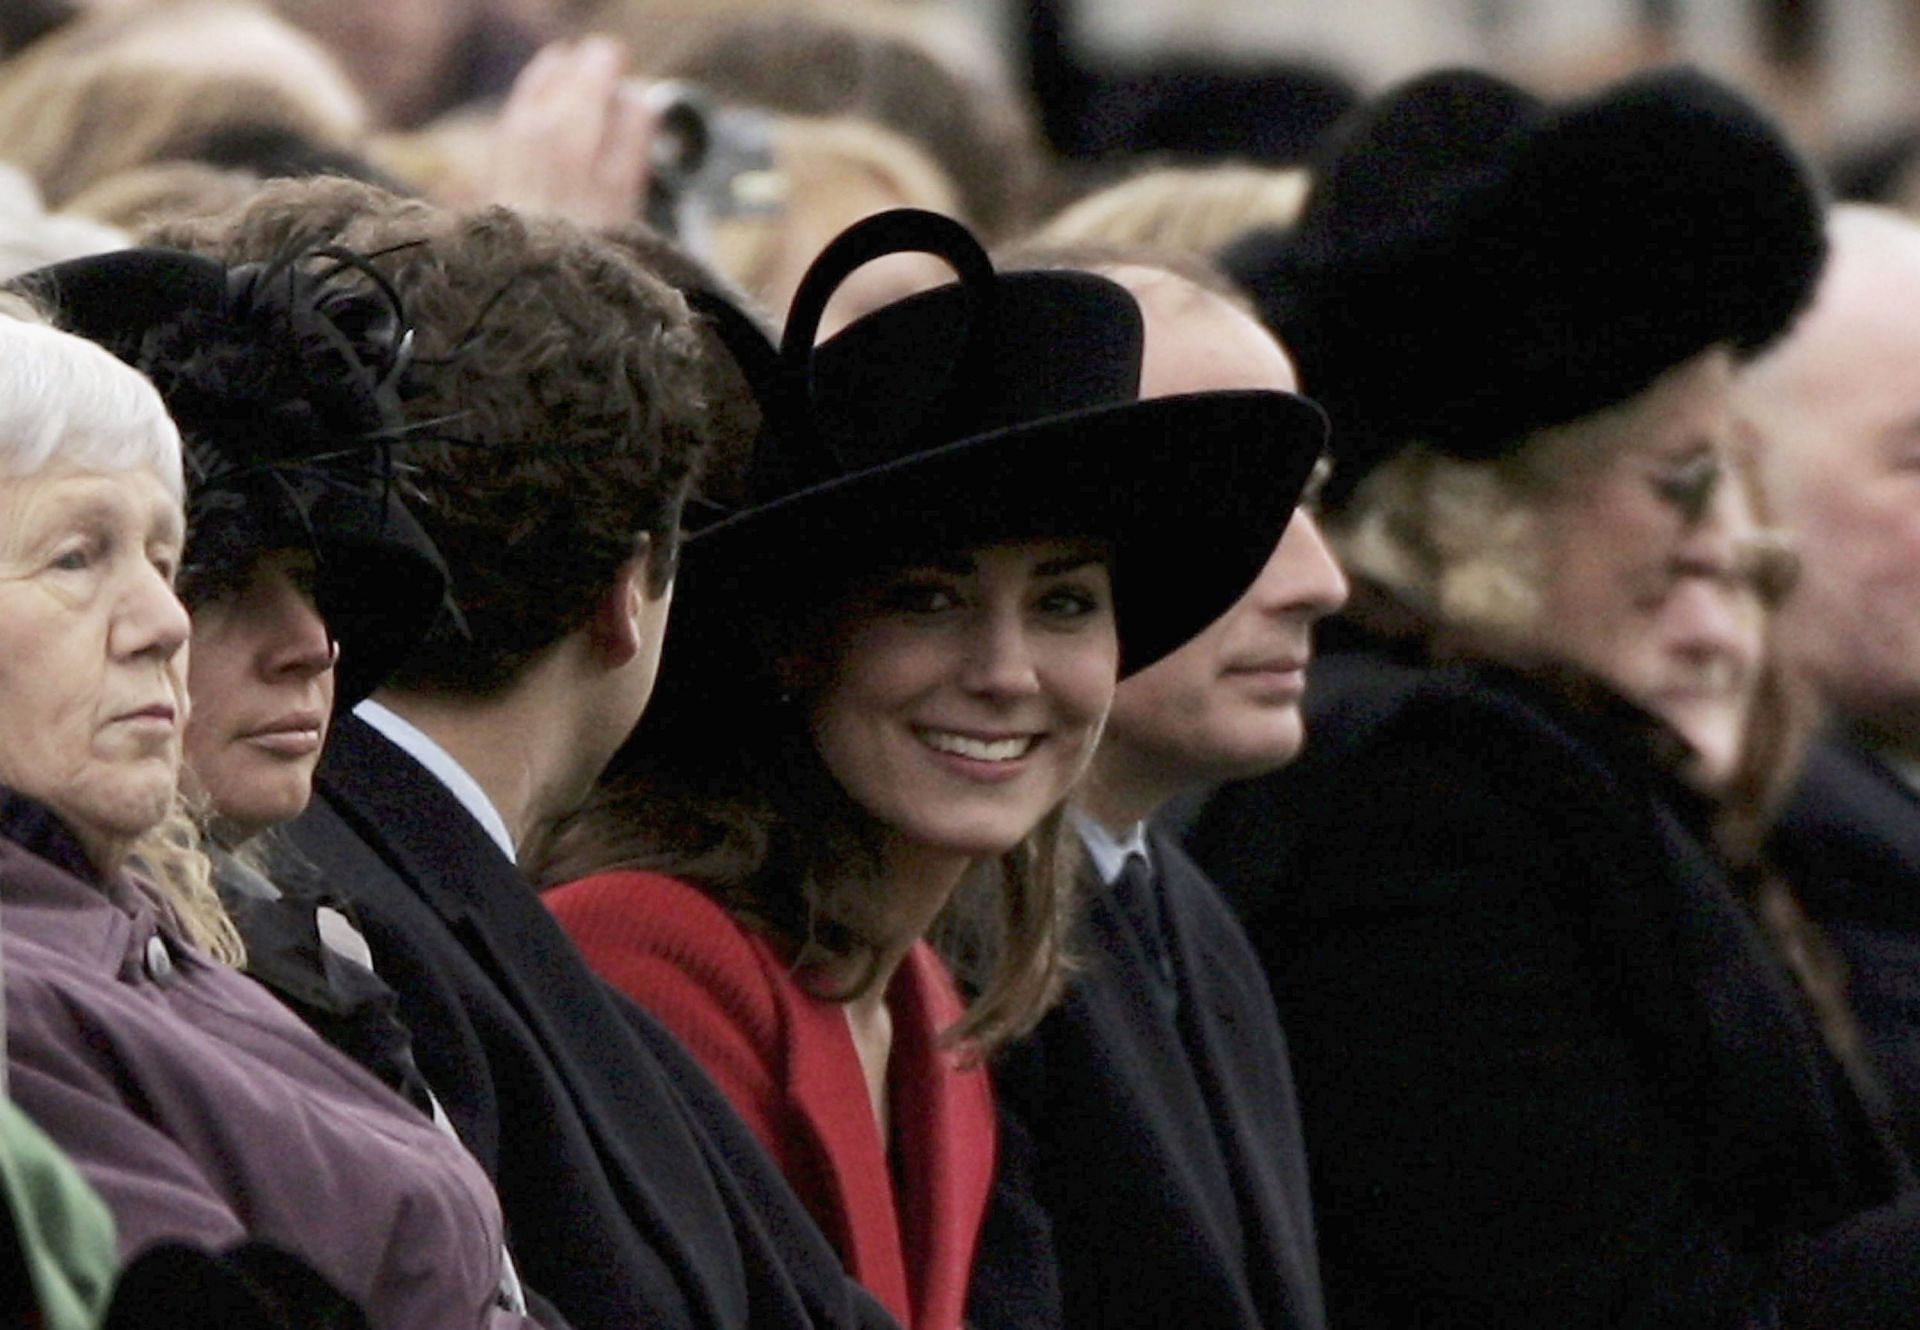 Kate Middleton (C) looks around while watching William take part in The Sovereign&#039;s Parade at The Royal Military Academy Sandhurst on December 15, 2006 (Image via Getty)